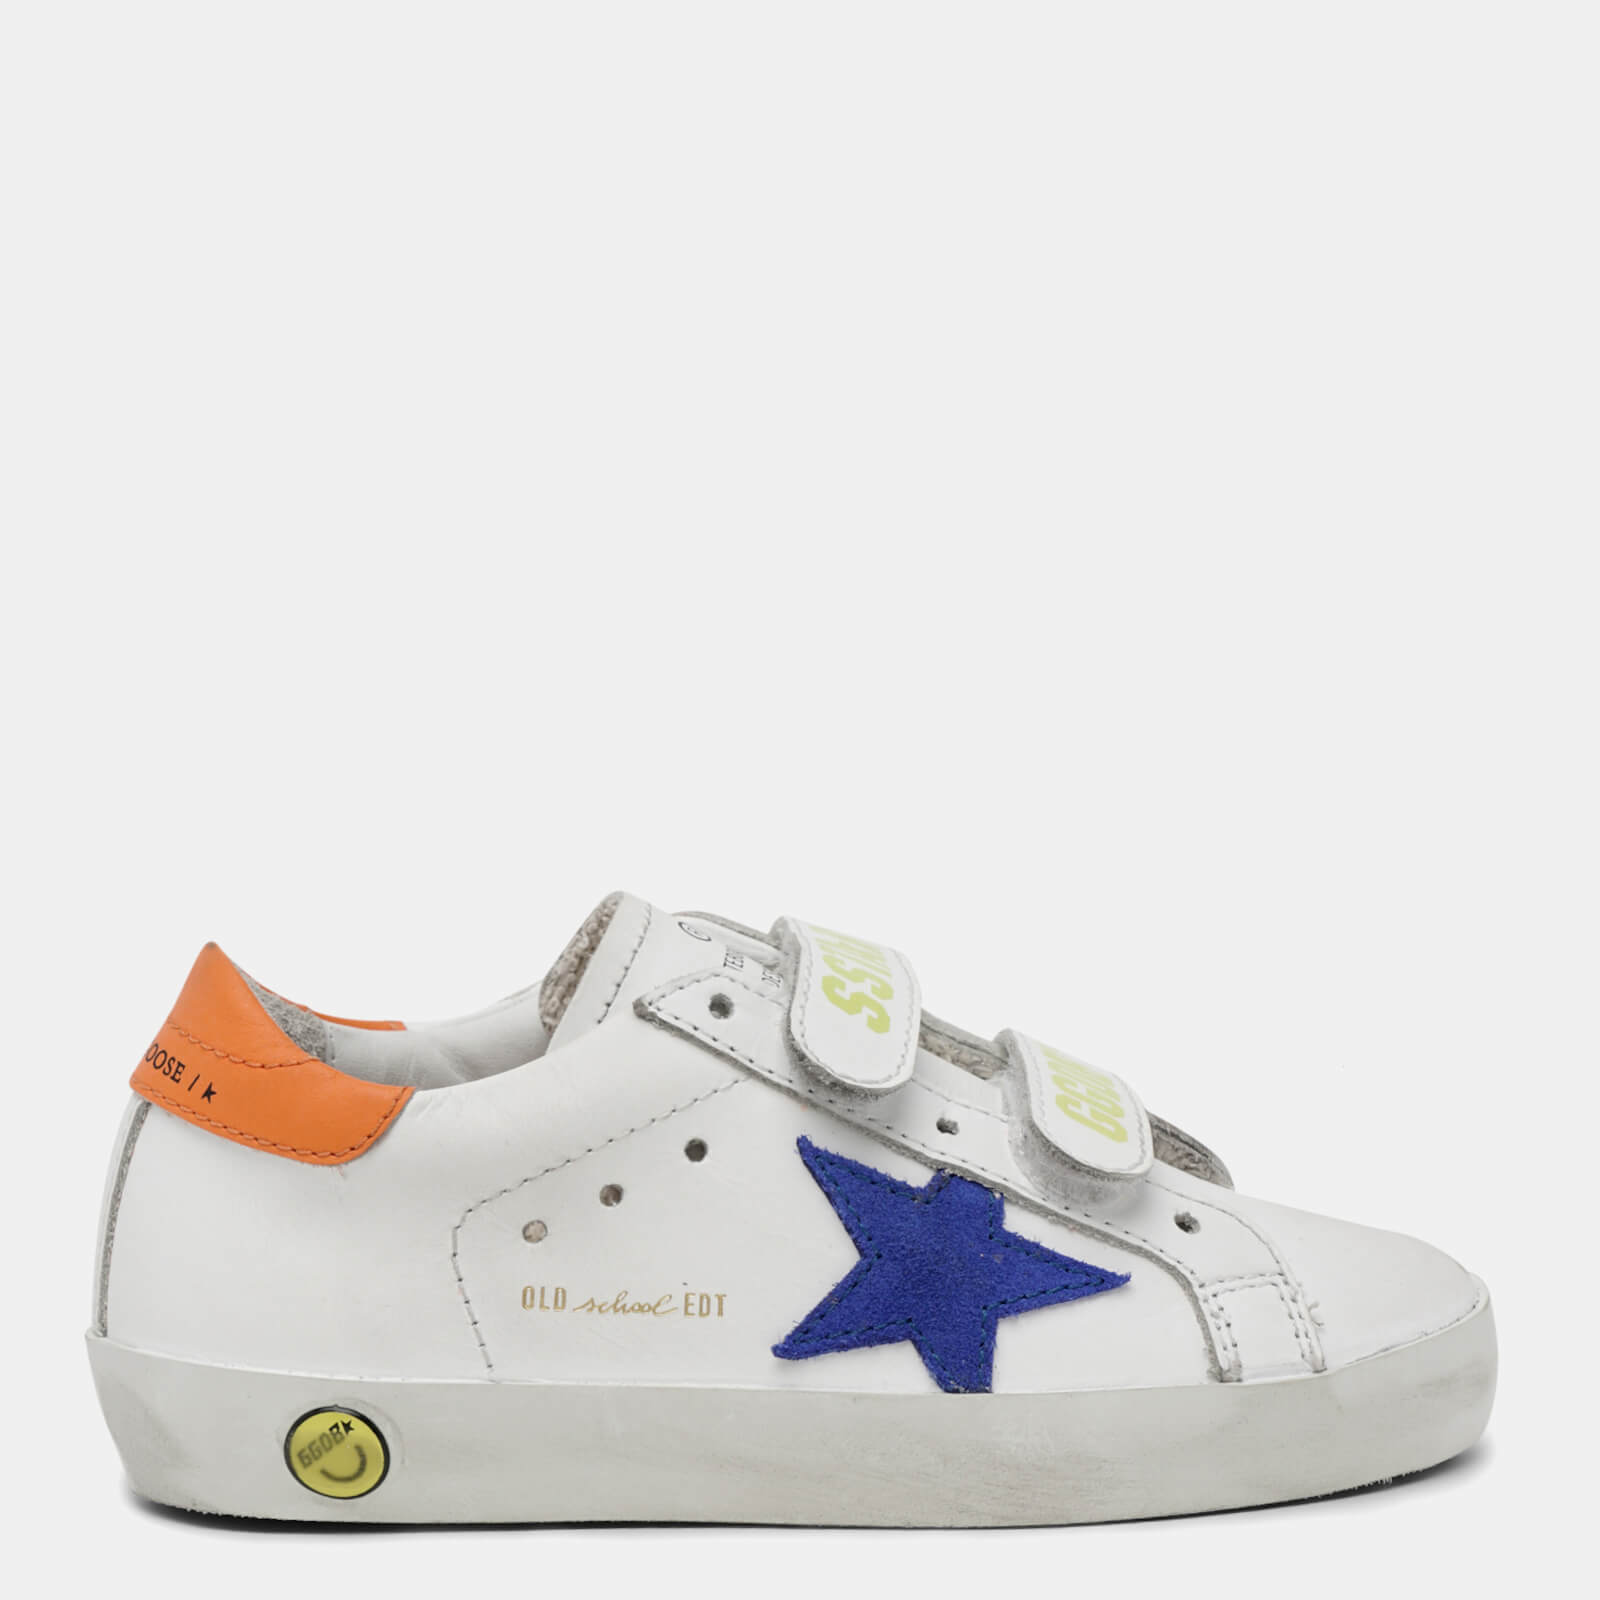 Golden Goose Toddlers' Old School Trainers - White/Bluette/Orange - UK 4.5 Toddler